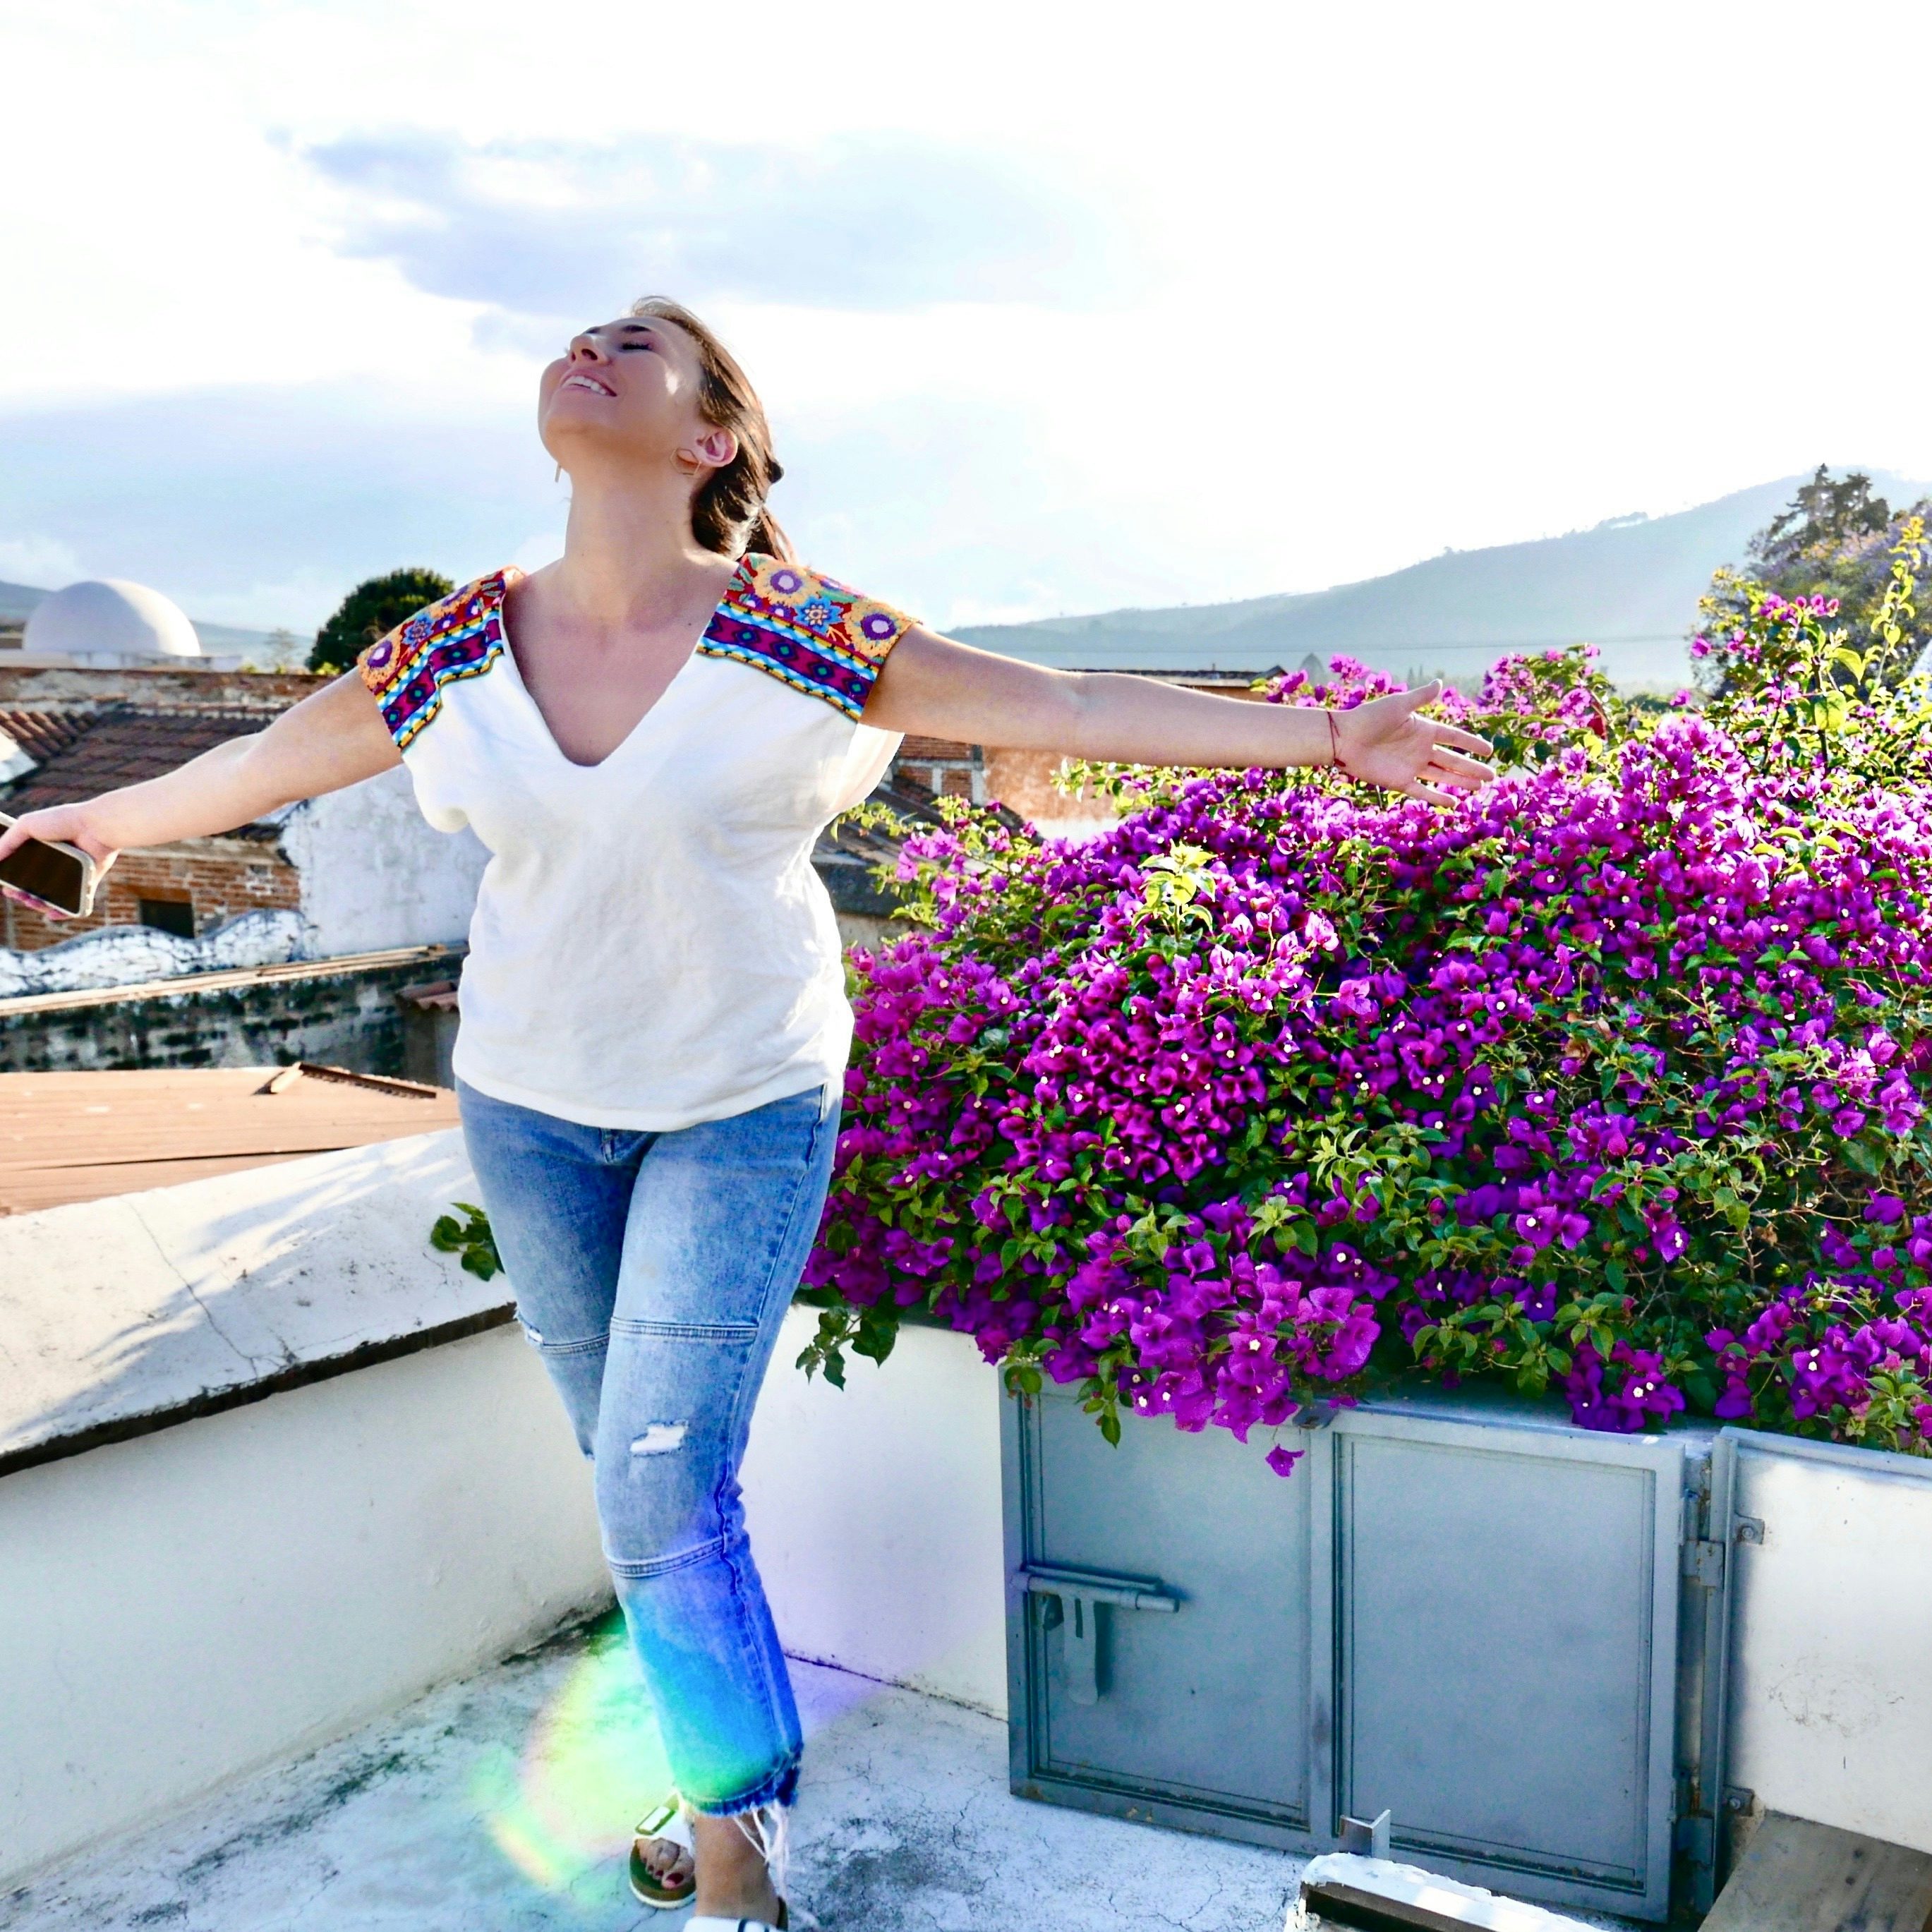 Travel Advisor Britt Wengel outside in jeans and a white top in front of purple flowers.